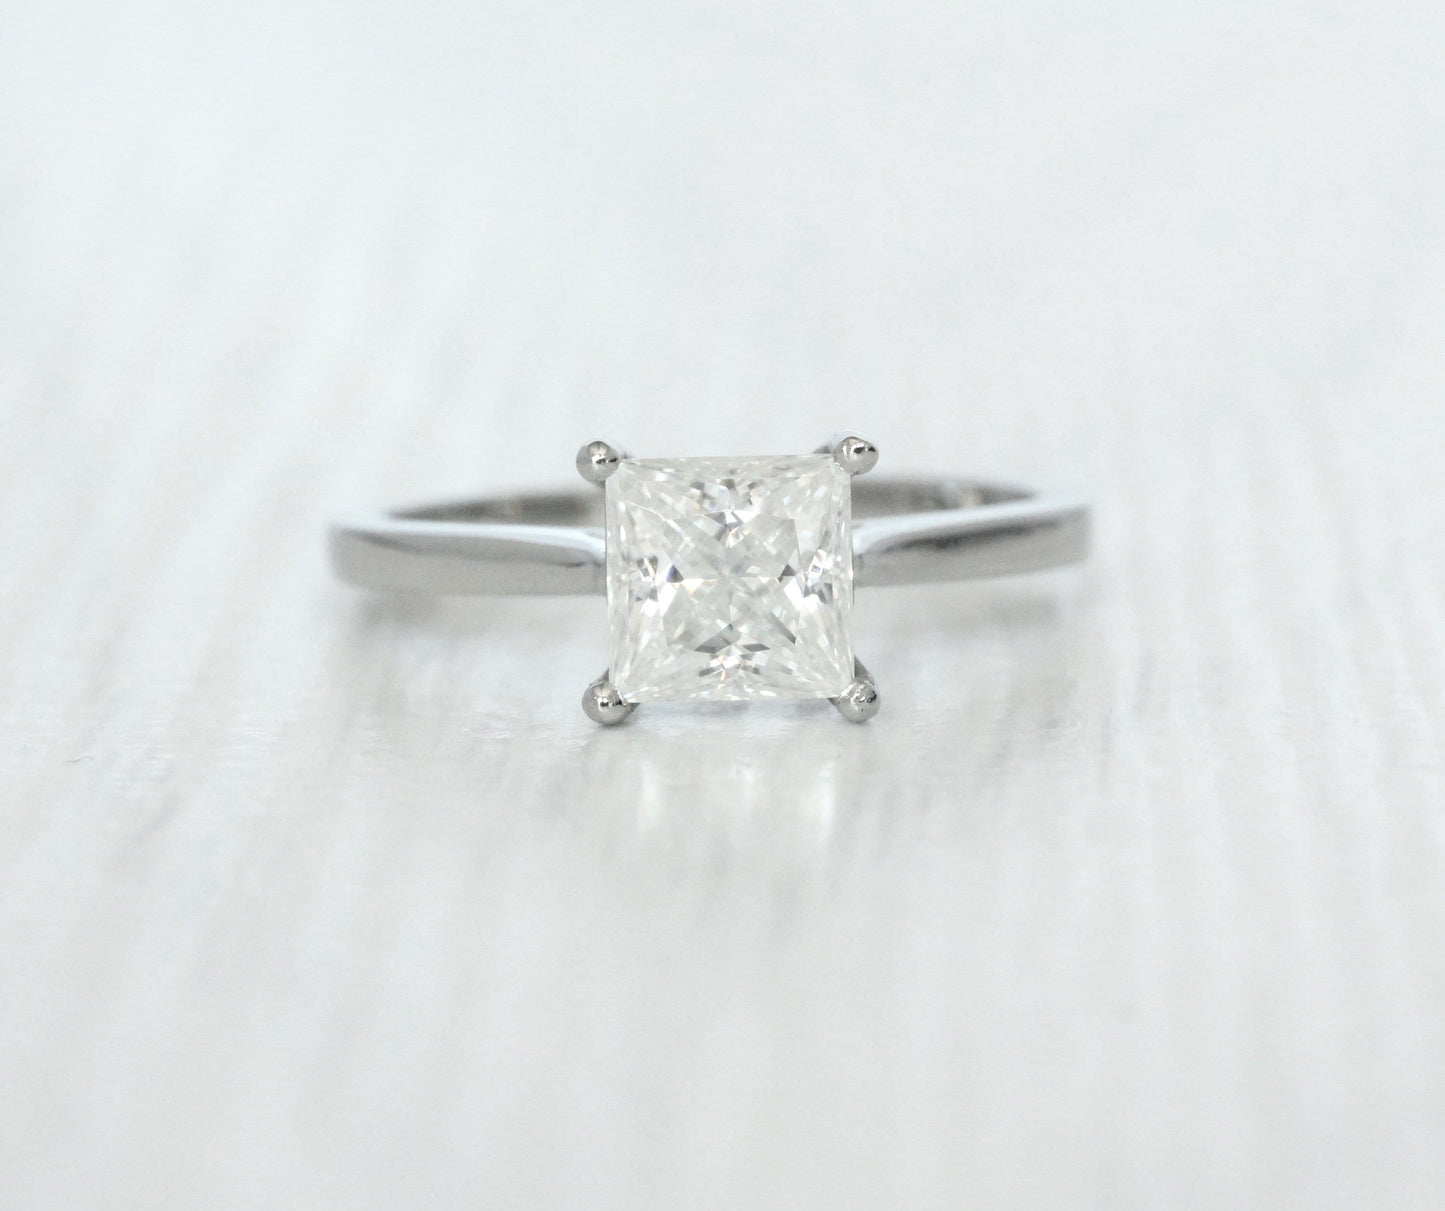 1ct Princess Cut Solitaire cathedral ring in Titanium or White Gold - Moissanite or Simulated diamond